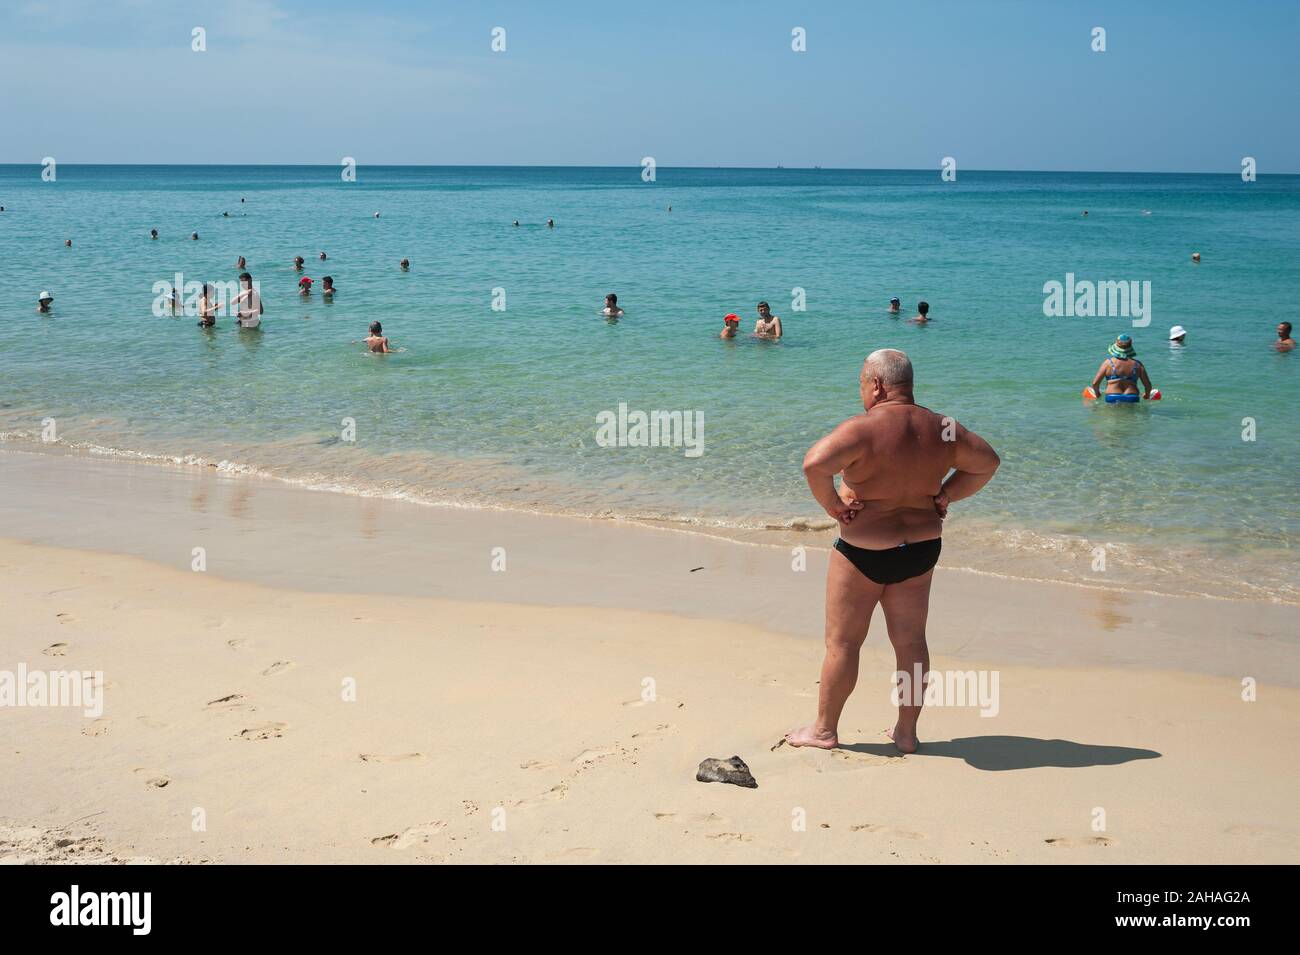 16.11.2019, Phuket, , Thailand - Holidaymakers bathing in the sea at Karon Beach, a popular destination for Russian tourists. 0SL191116D004CAROEX.JPG Stock Photo